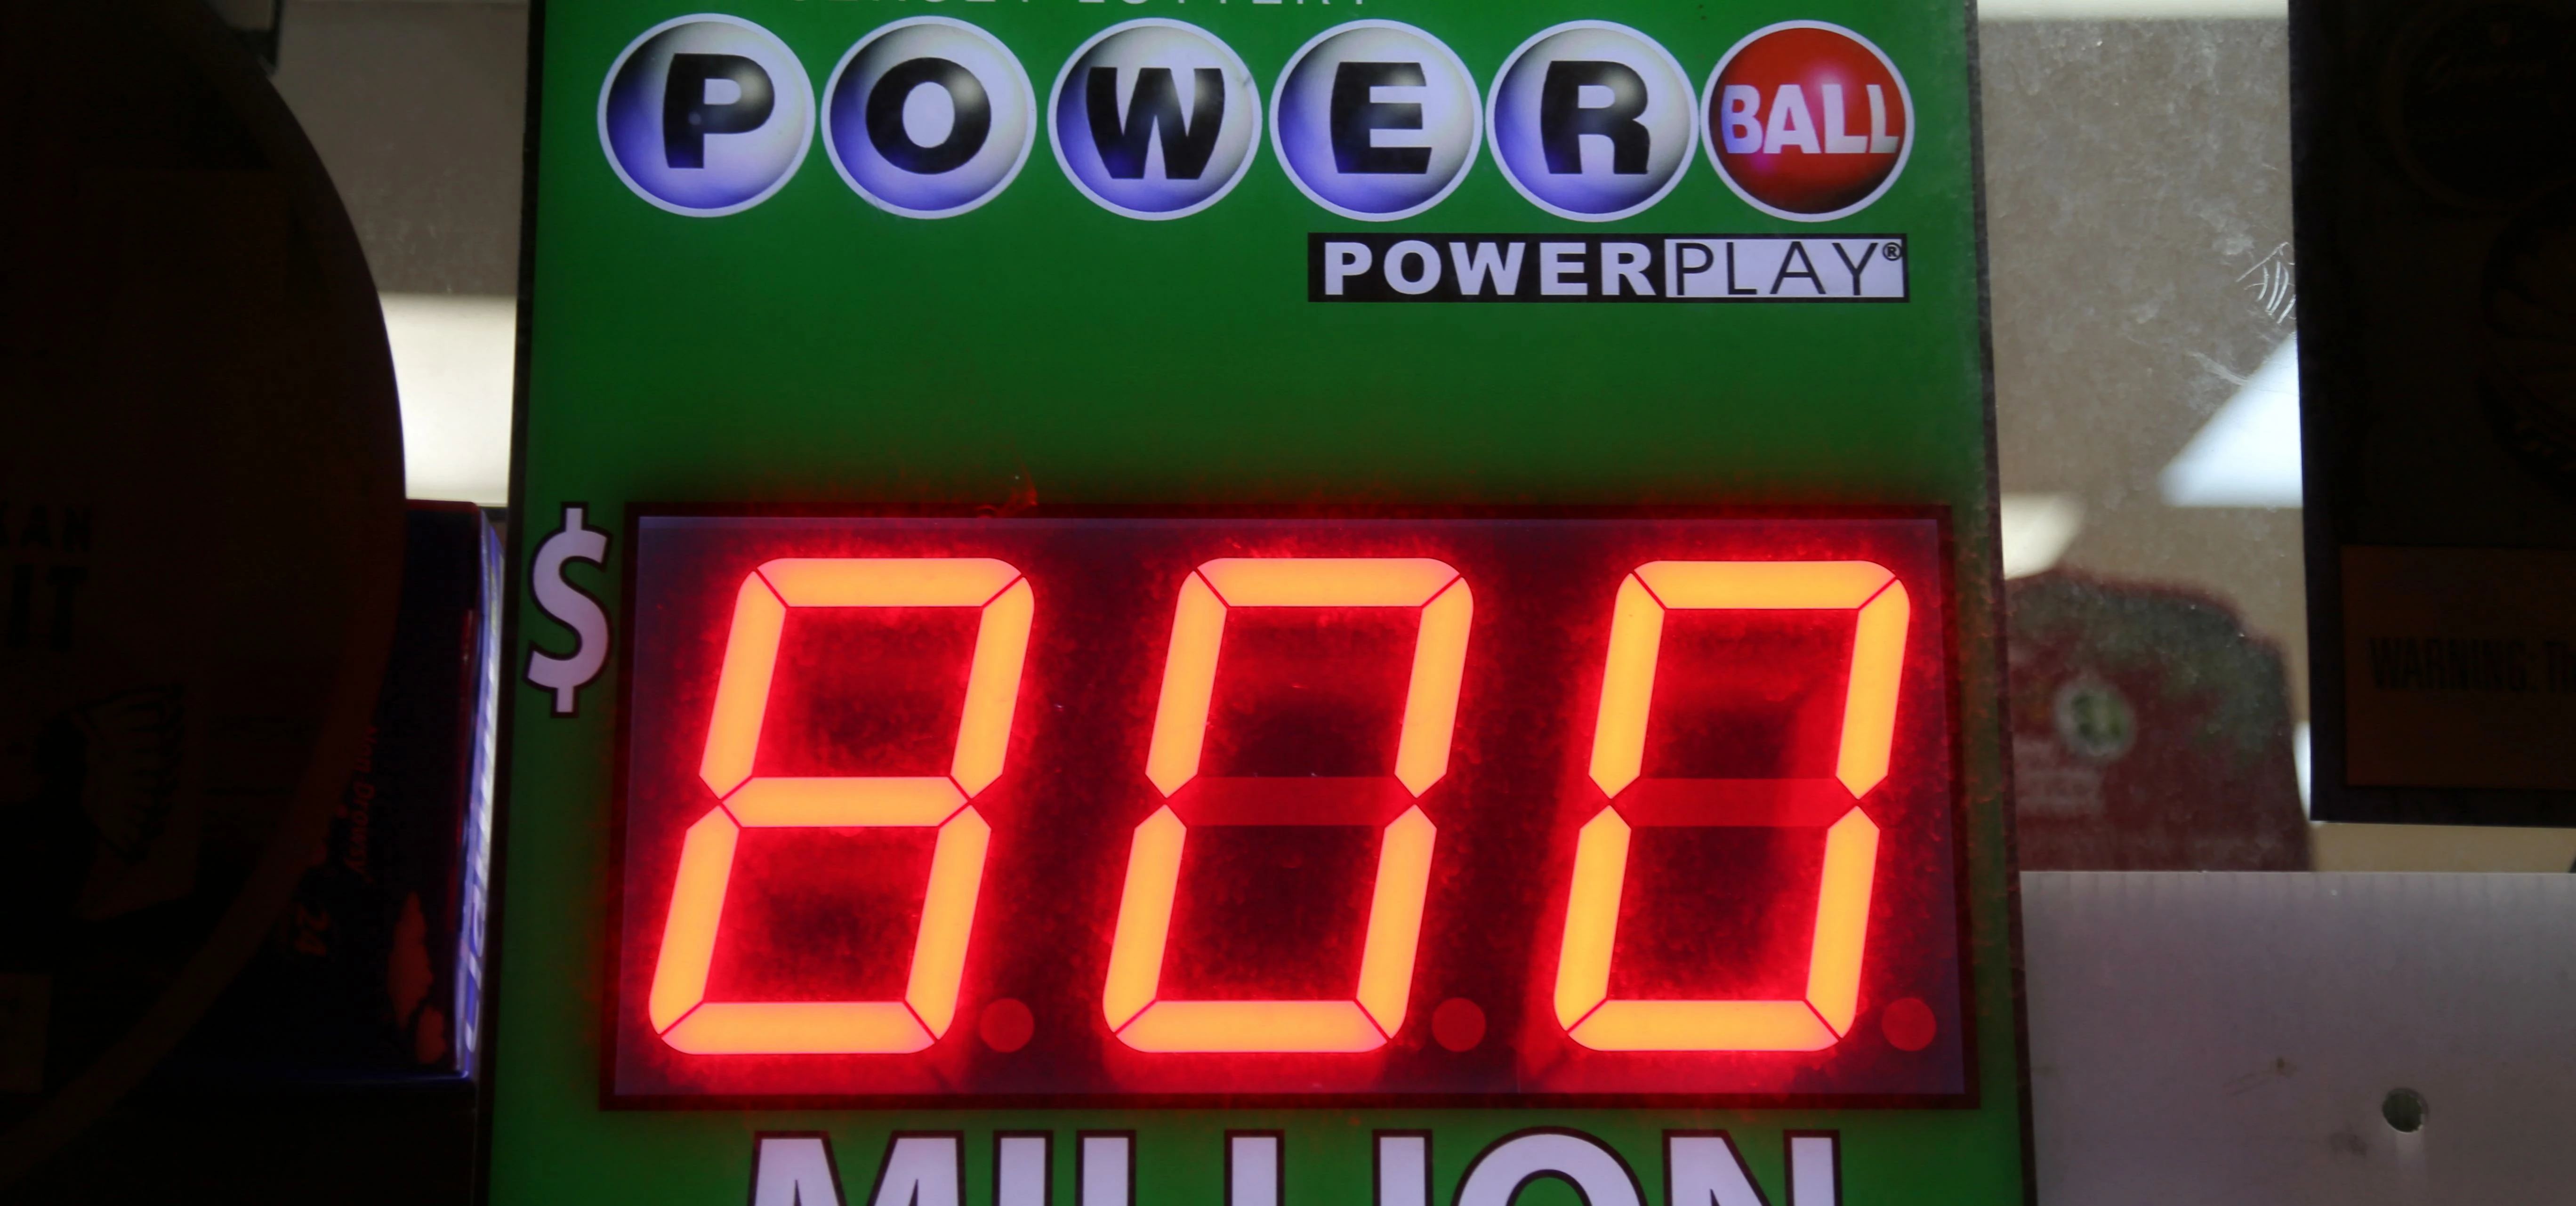 PowerBall jackpot is a whopping $800 million